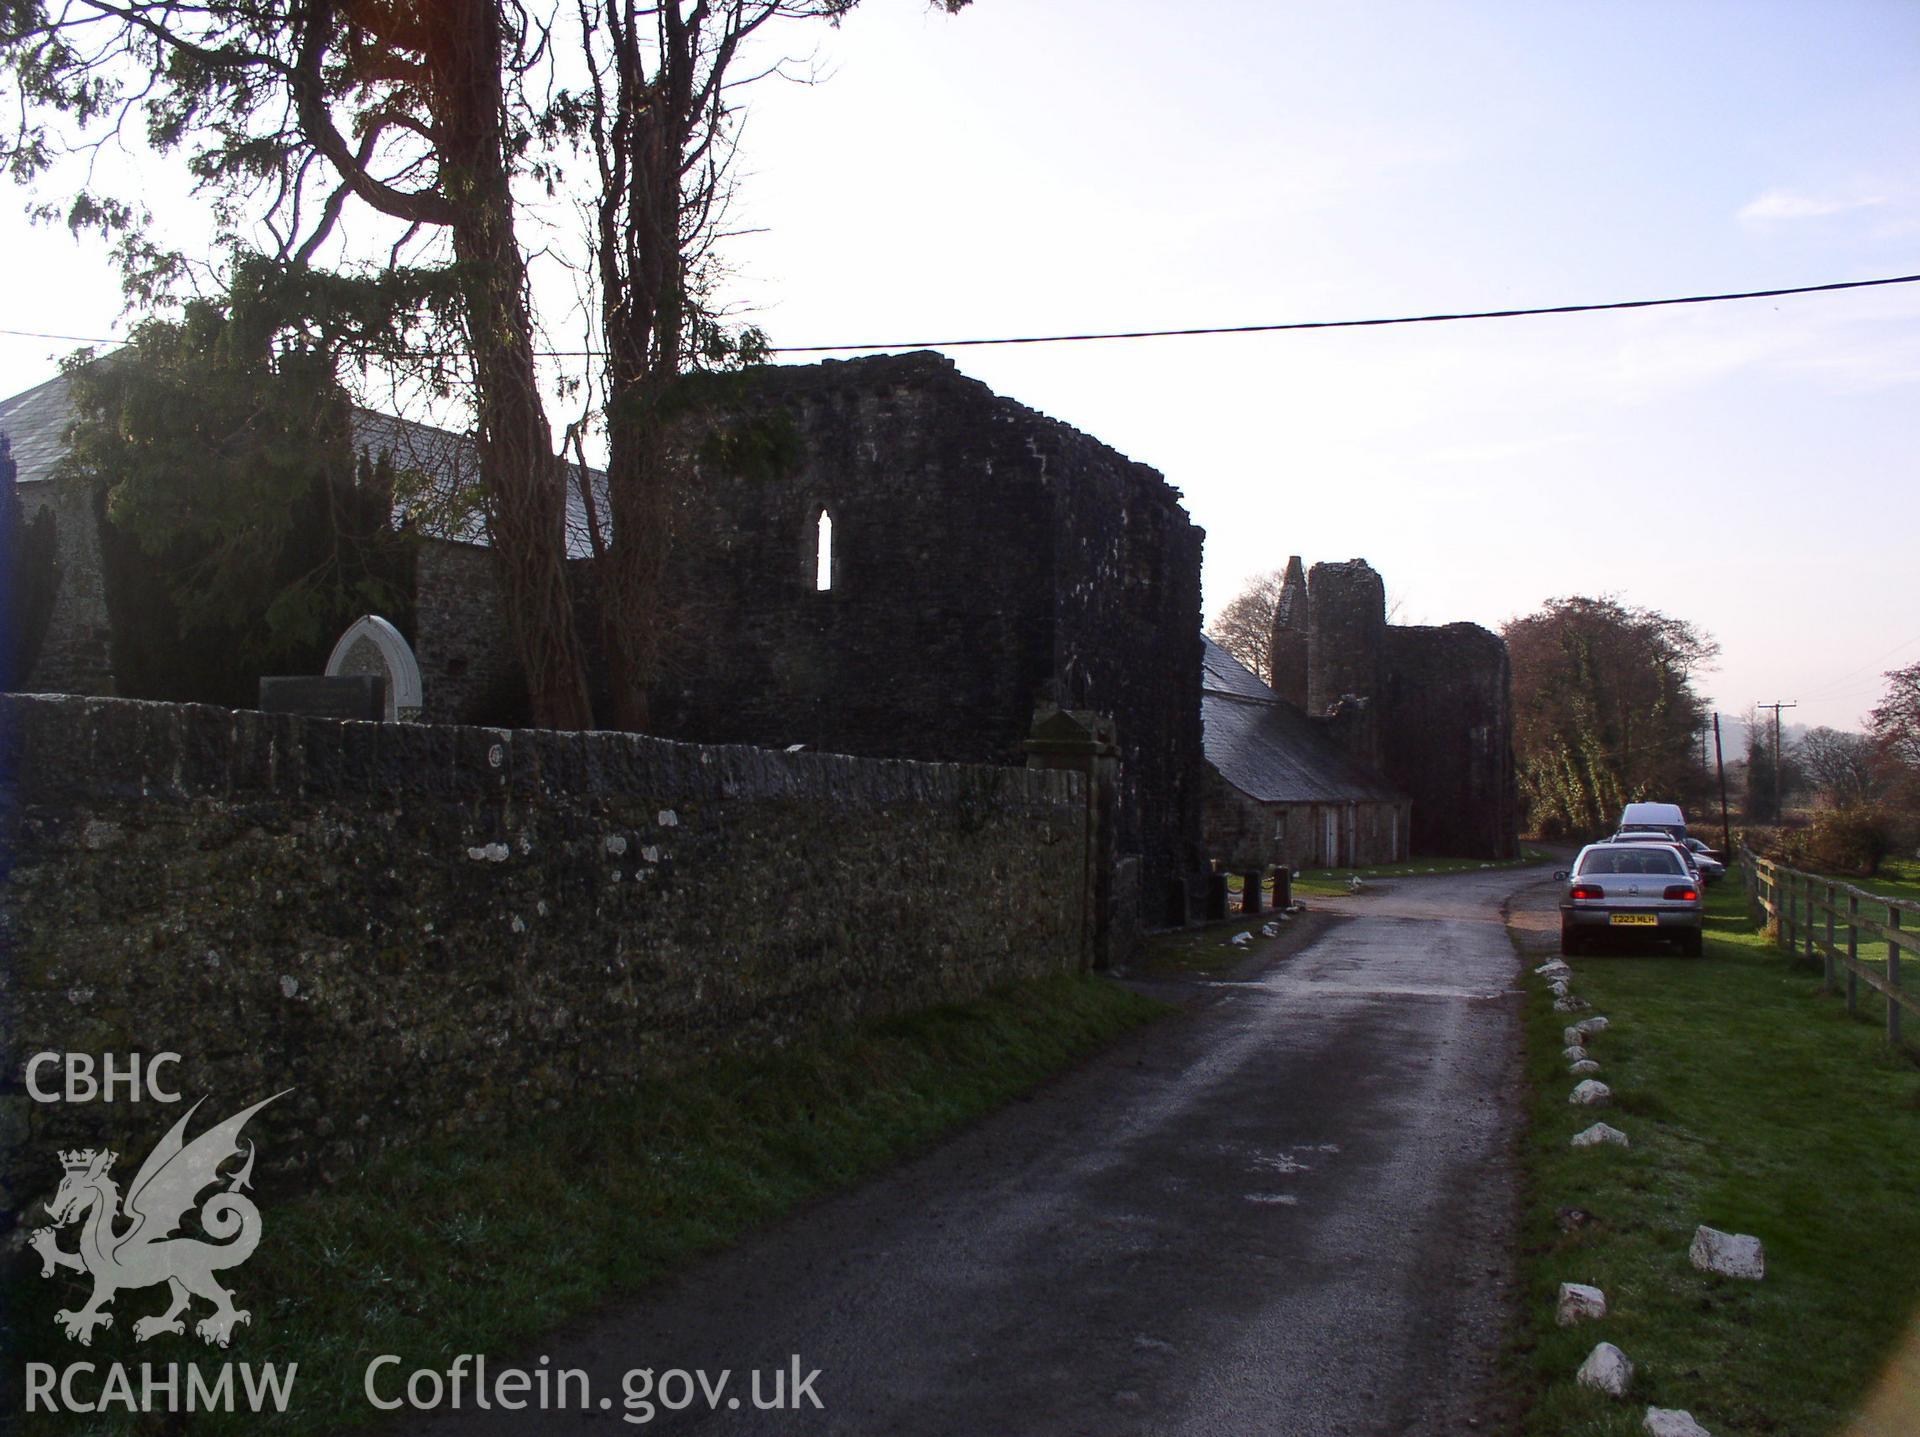 Colour digital photograph showing part of the exterior of St. Michael's Church, Ewenny; Glamorgan.